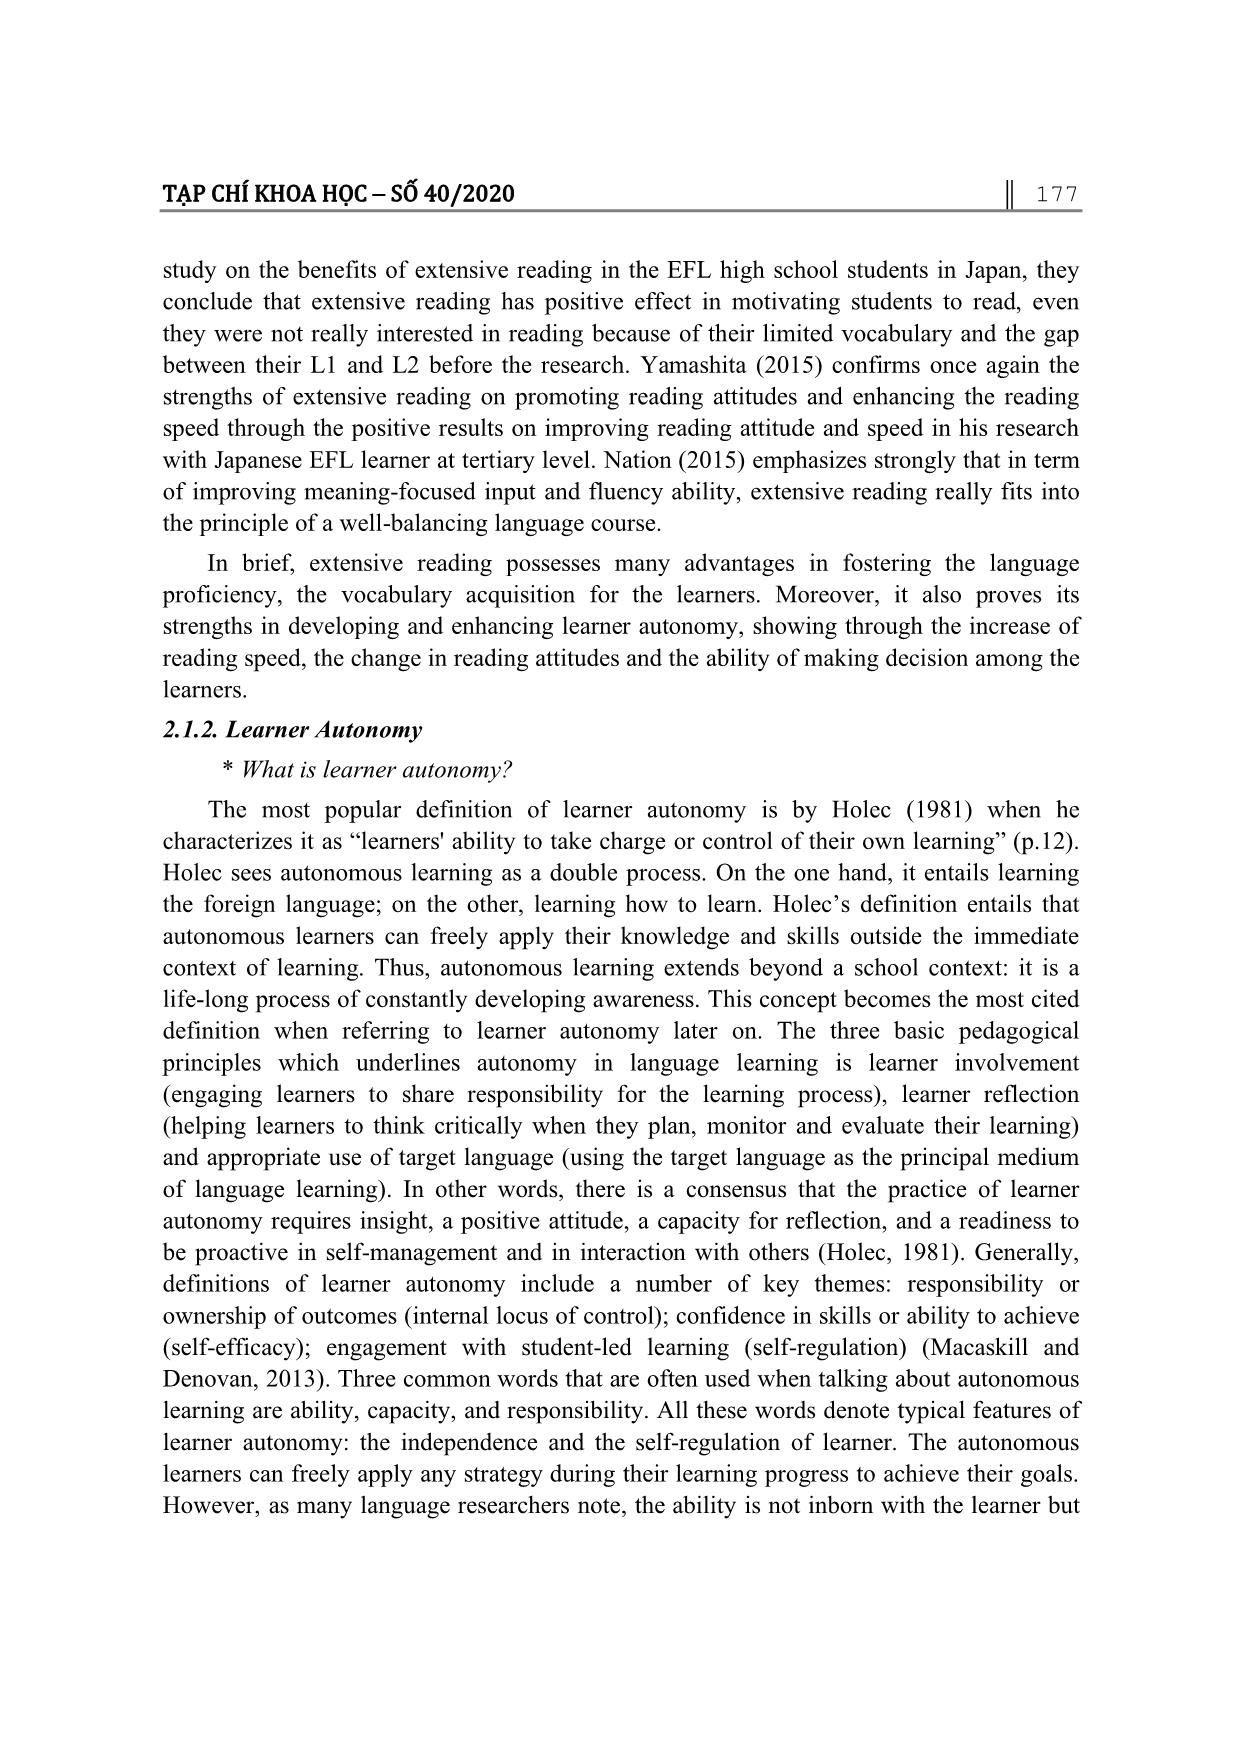 1st year students’ perceptions of extensive reading and learner autonomy: A preliminary study at Hanoi pedagogical university number 21 trang 4